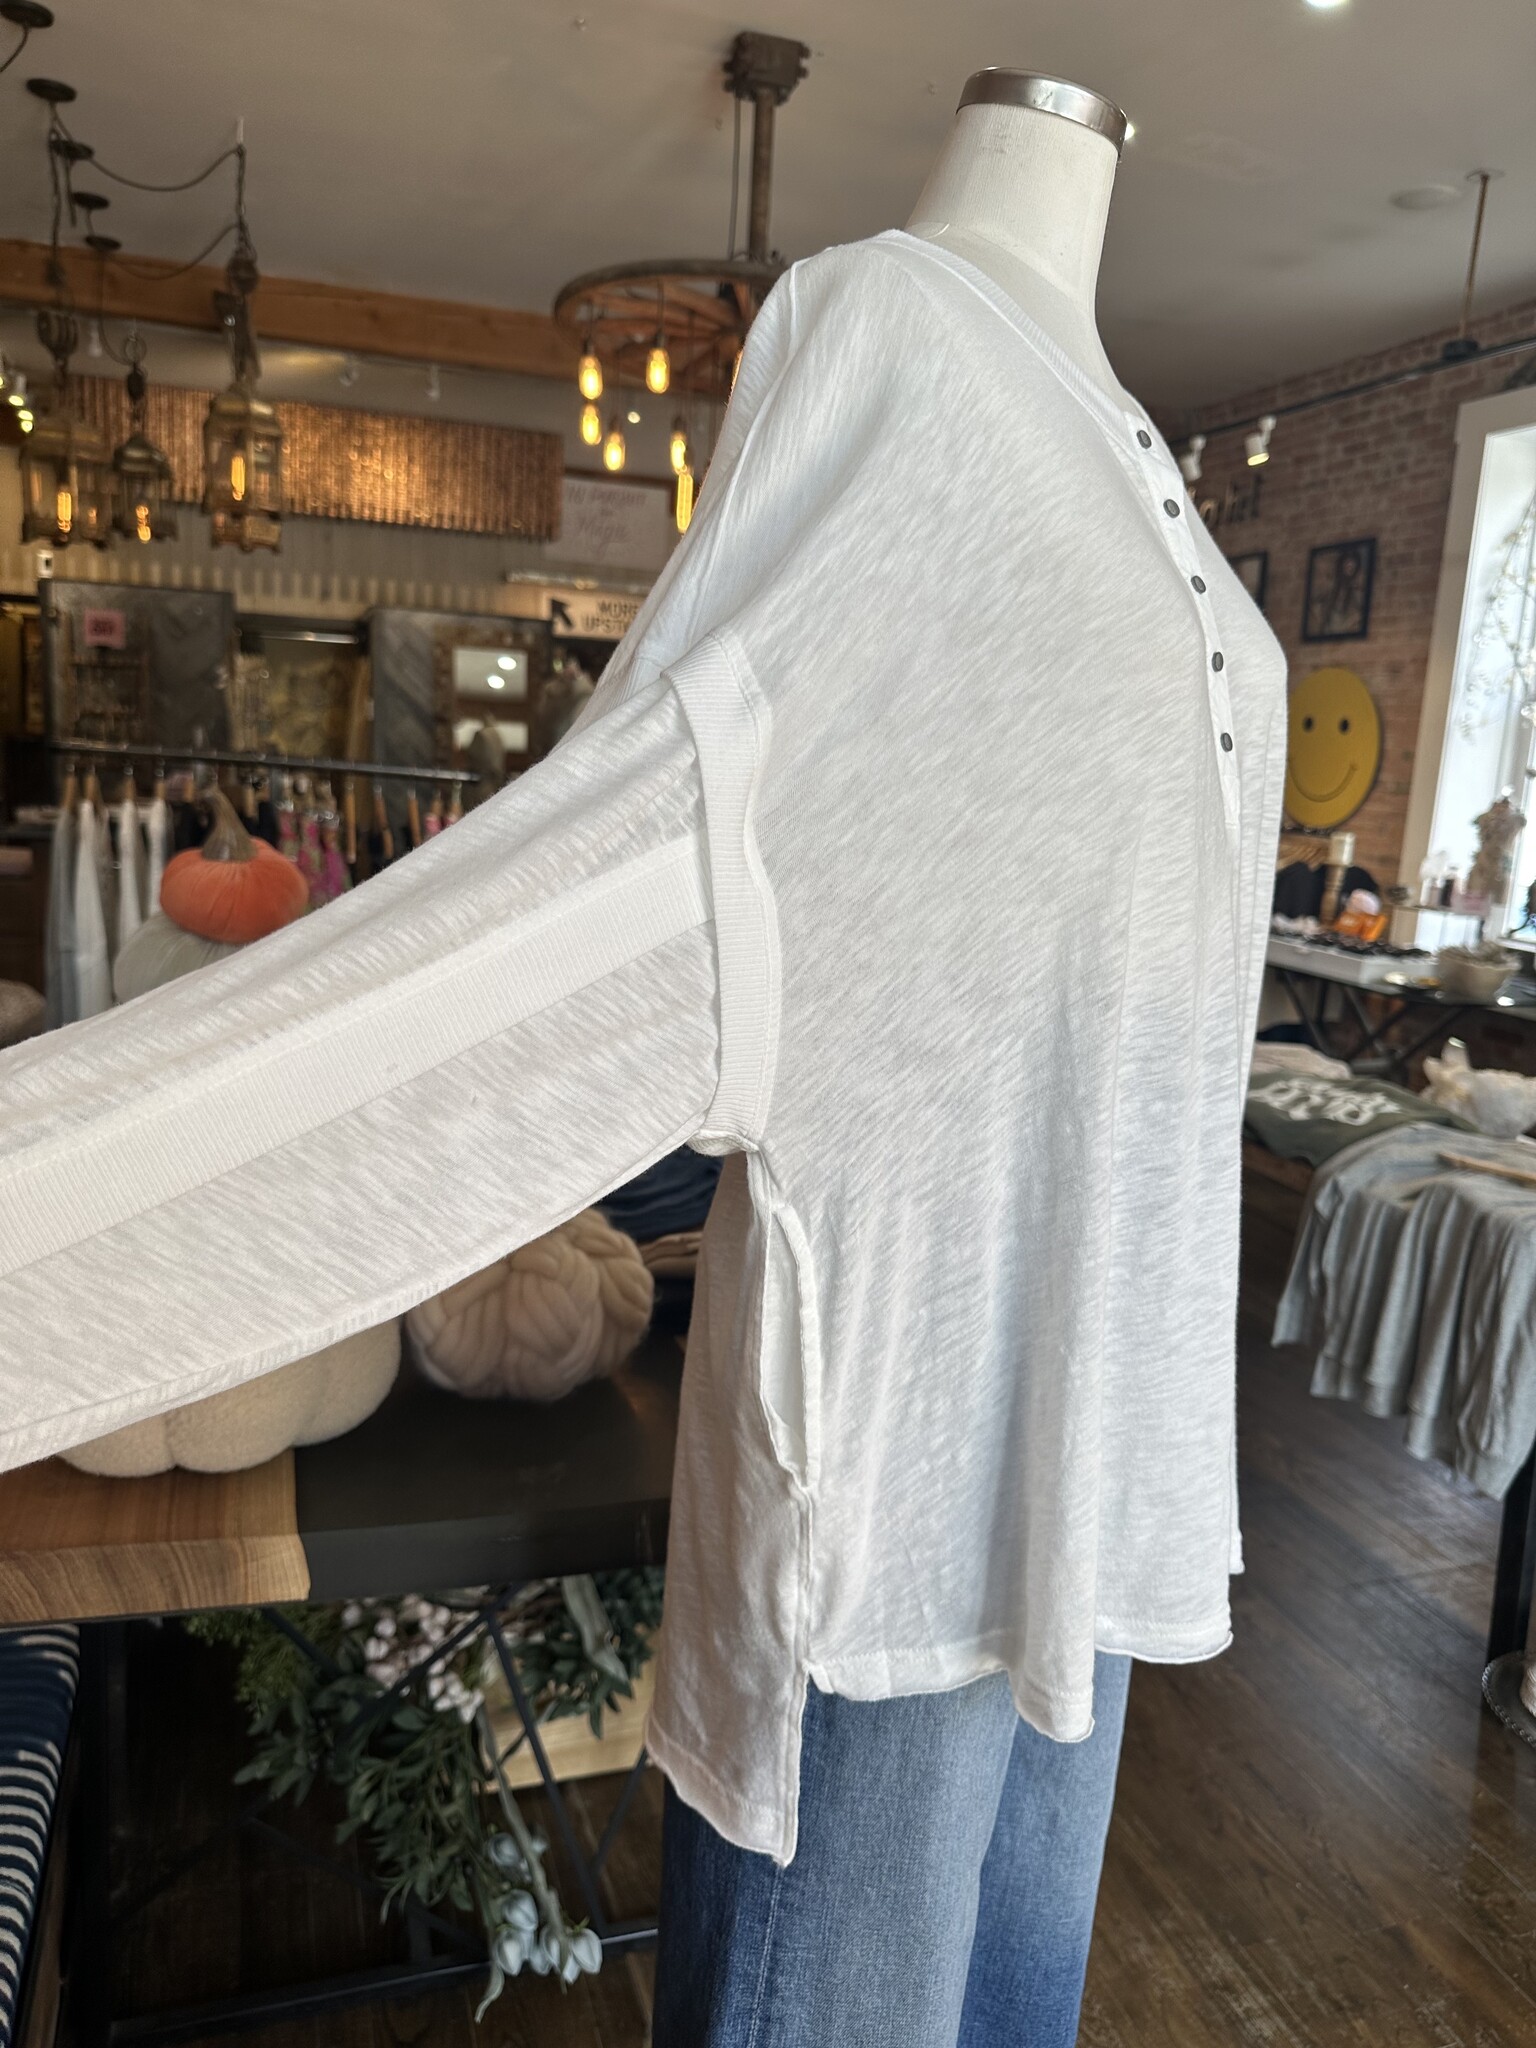 Fp Movement Free People One Up Long Sleeve Top In Blue Egret At